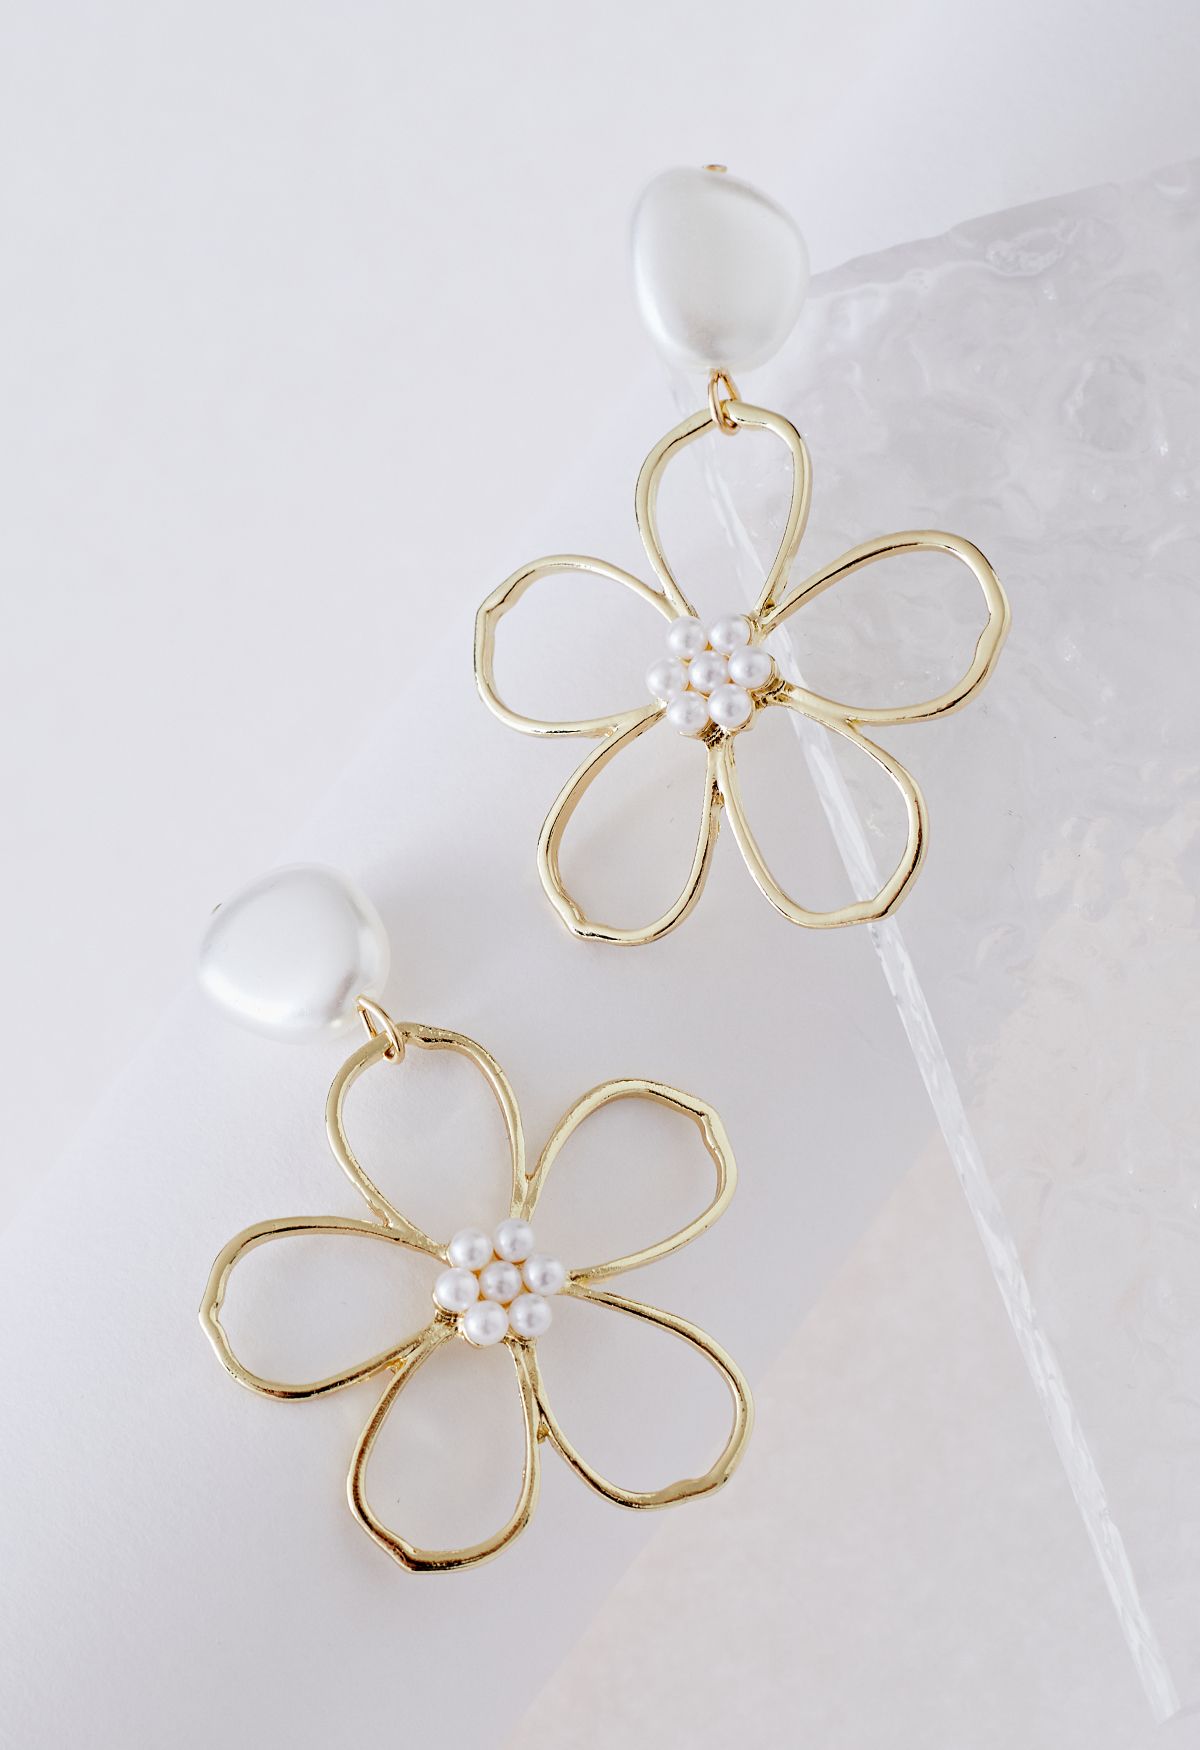 Pearly Hollow Out Floral Earrings